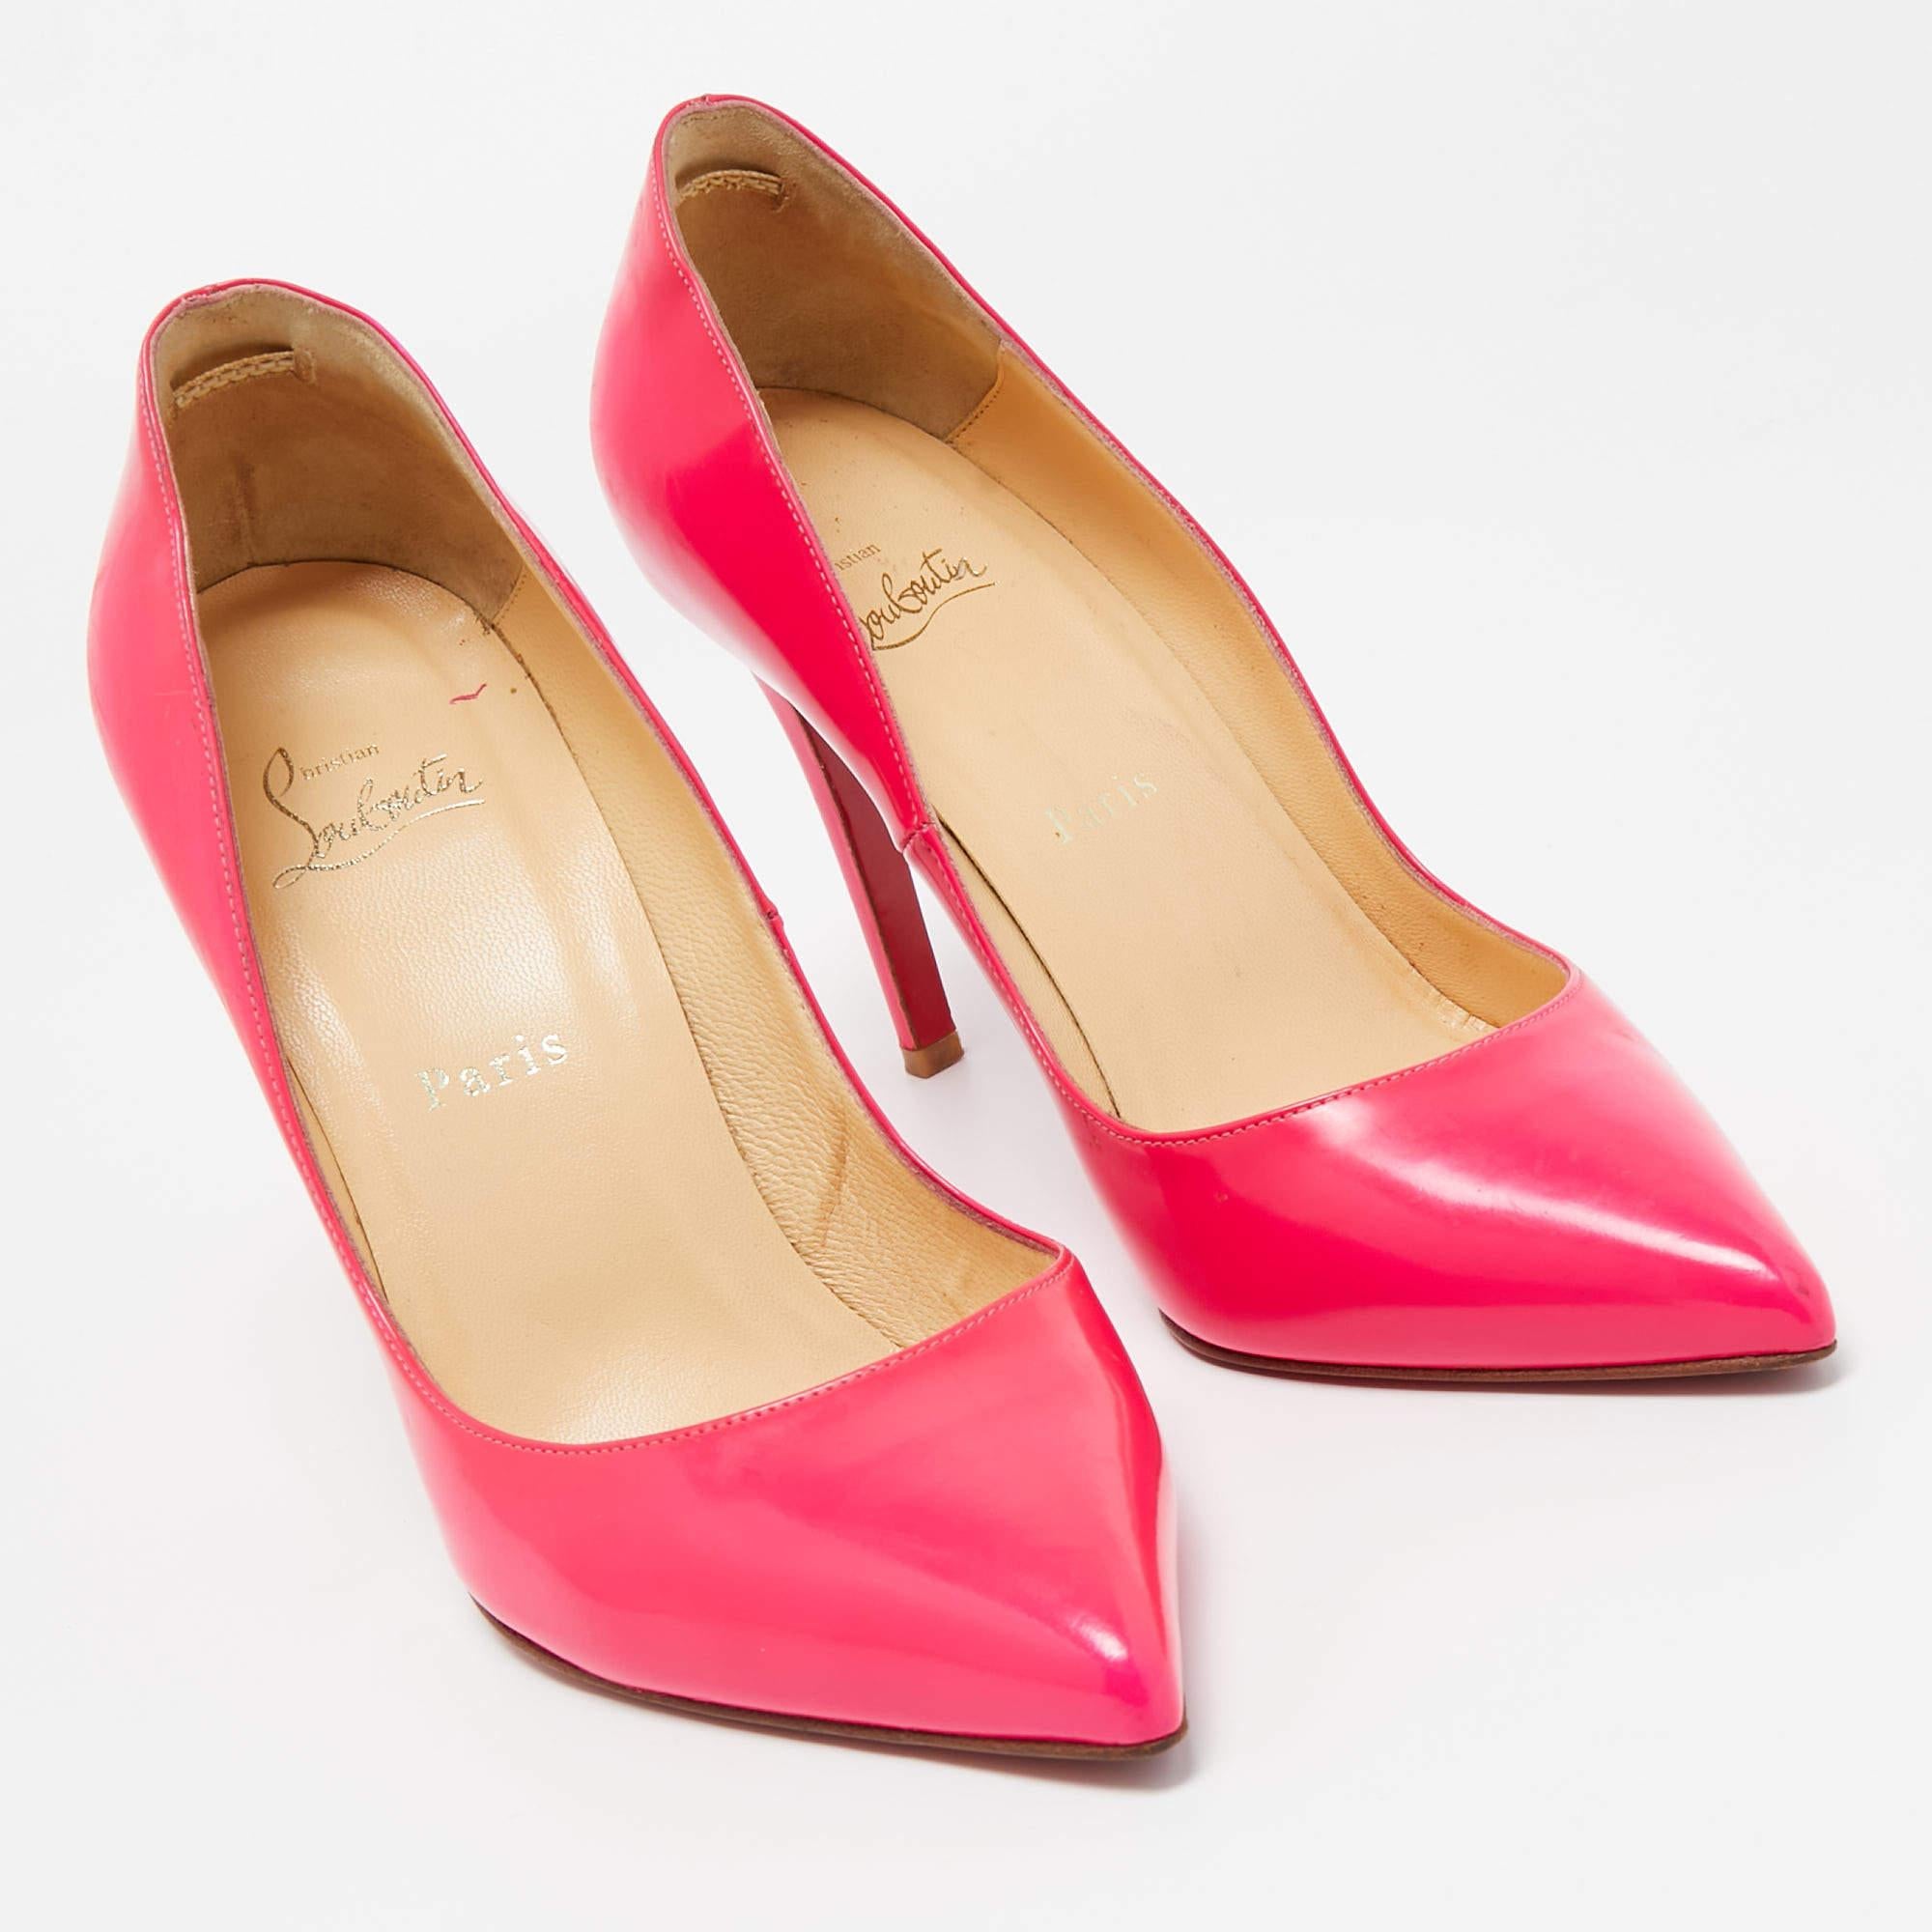 Women's Christian Louboutin Pink Leather So Kate Pointed Toe Pumps Size 38.5